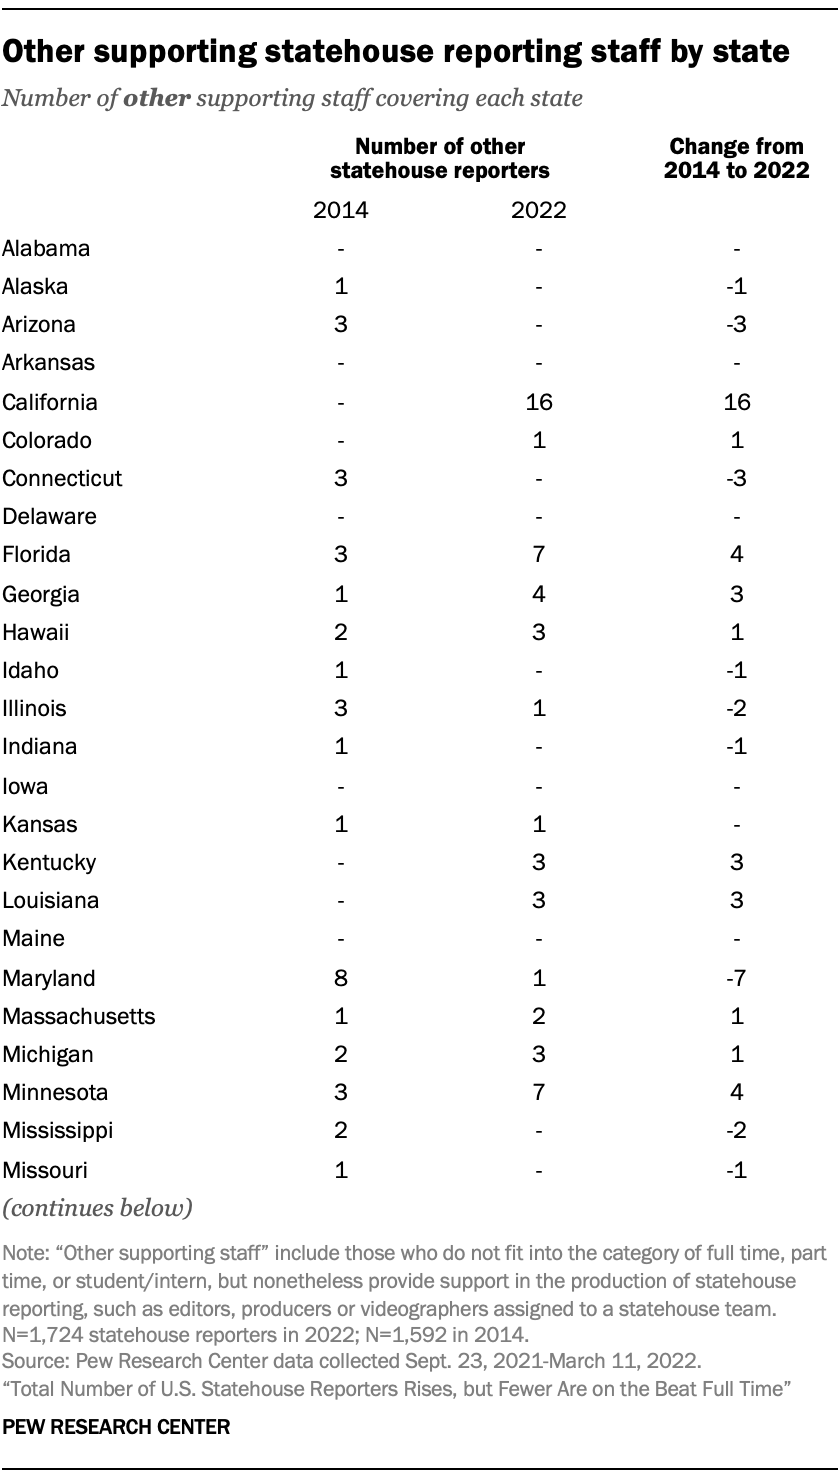 Other supporting statehouse reporting staff by state (Alabama-Missouri)